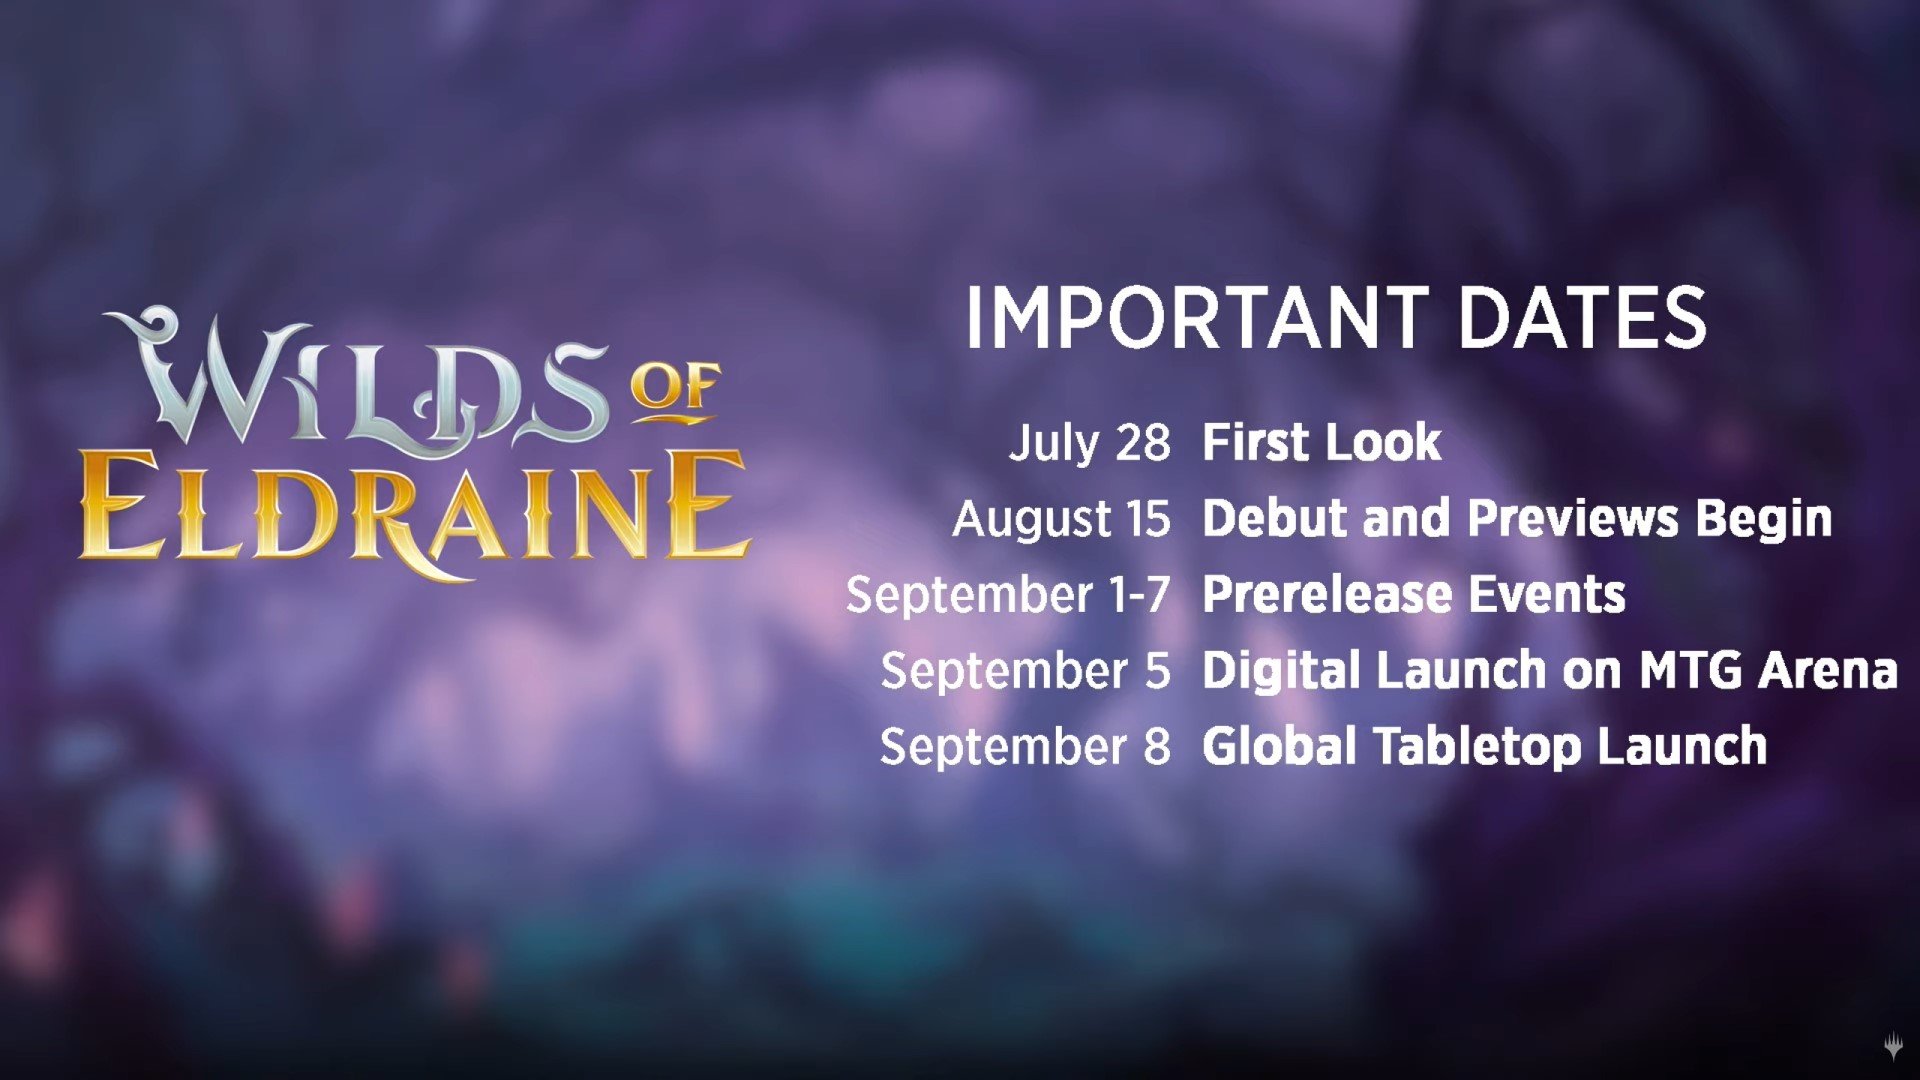 MTG Wilds of Eldraine release date diagram, showing all the key dates for the set.